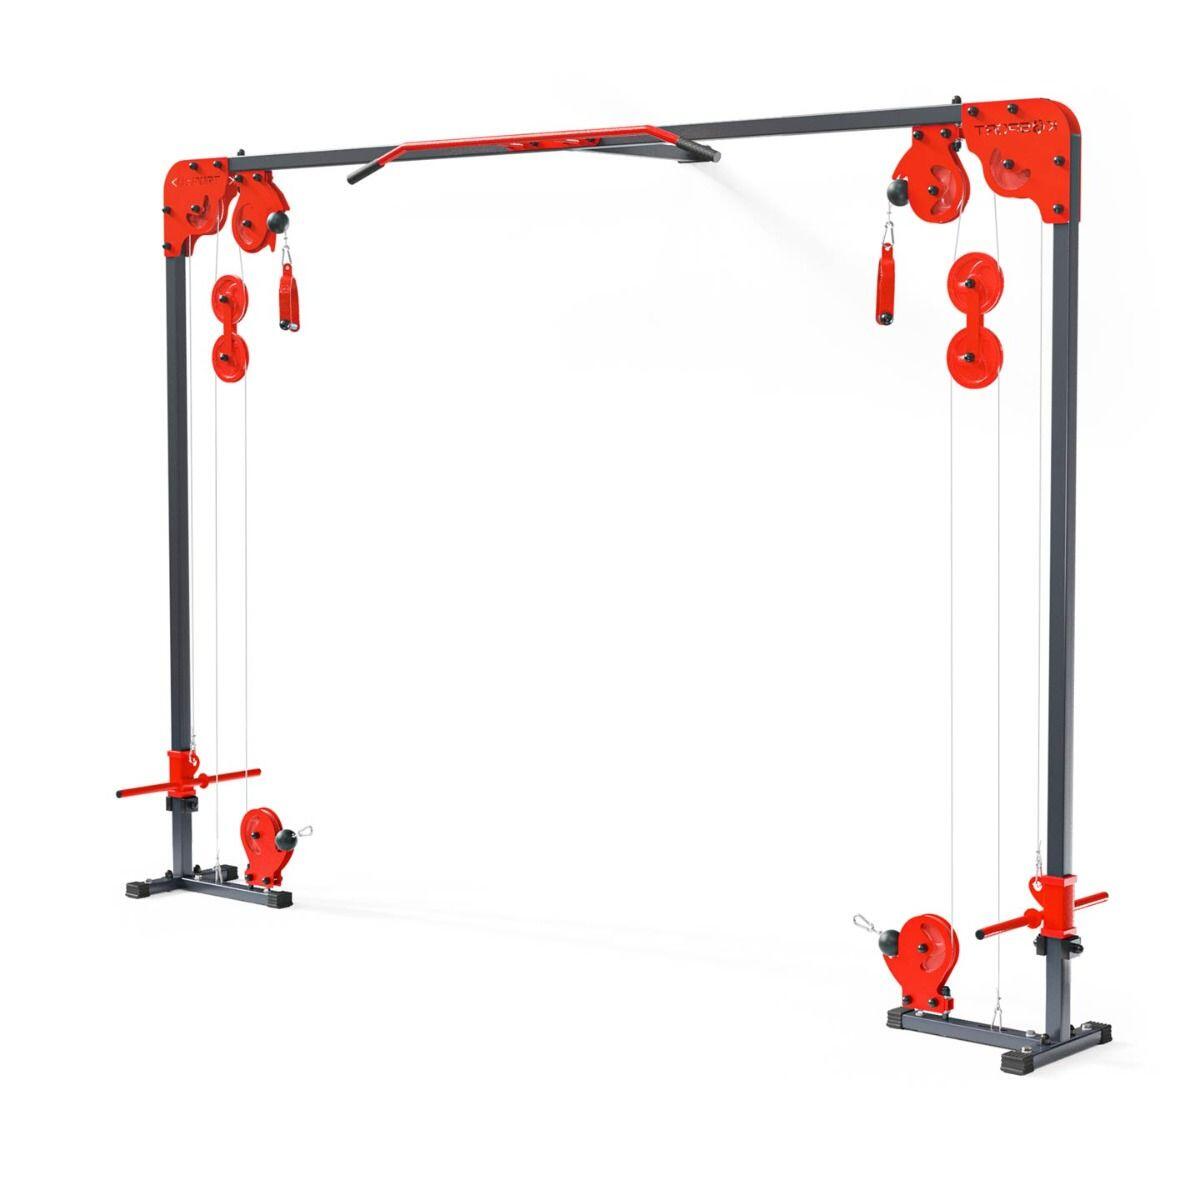 K-SPORT Wall Mounted Cable Crossover Machine with Pull Up Bar